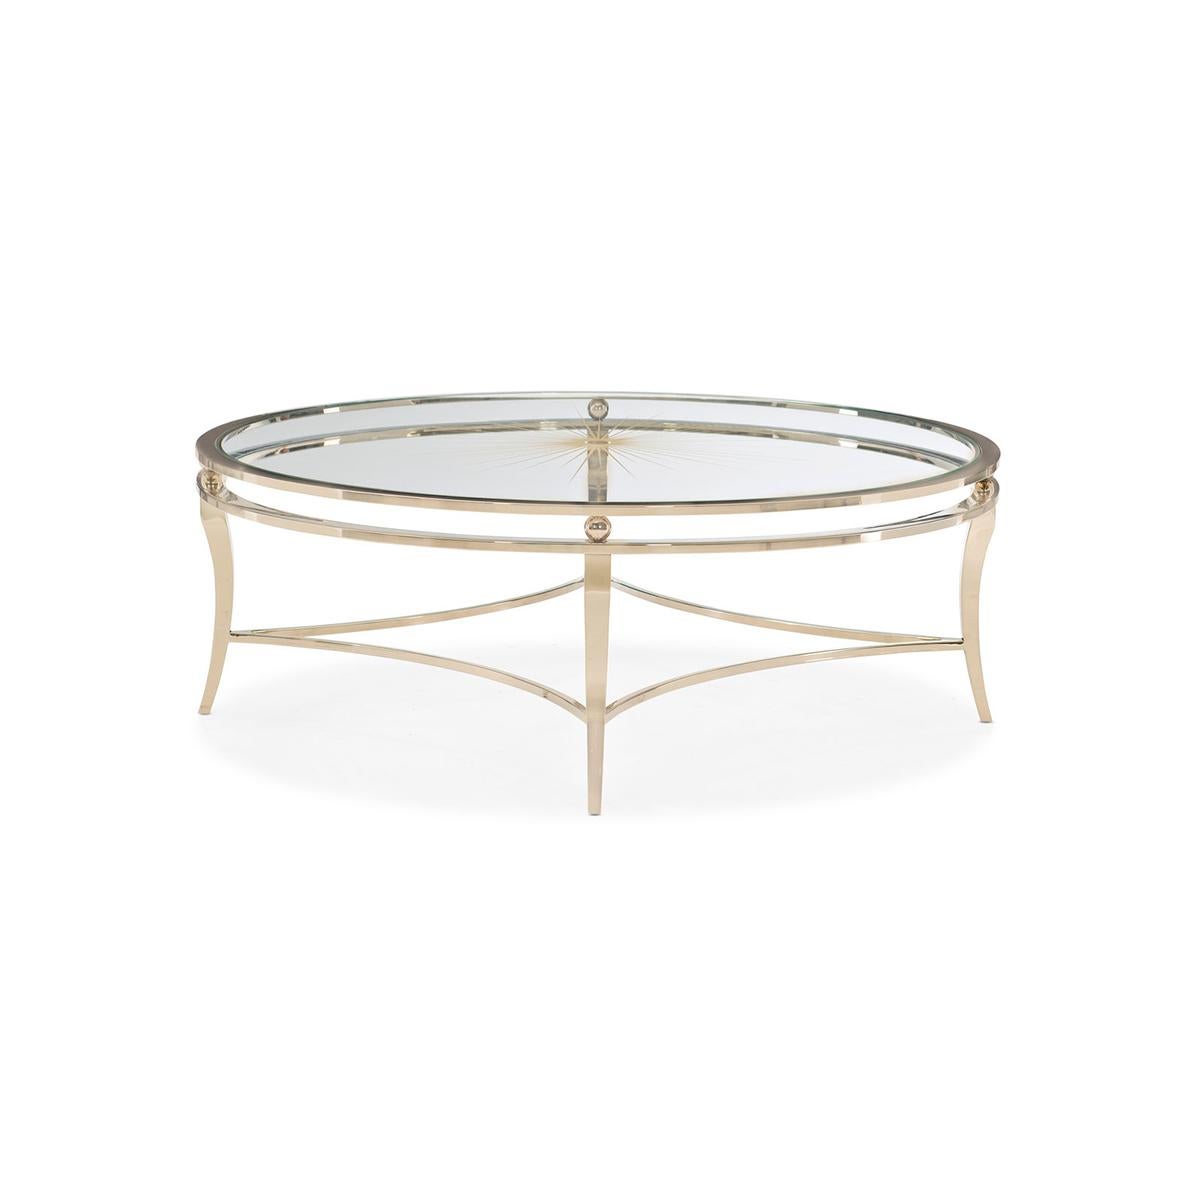 A classic design is infused with character and includes a stunning glass top silkscreened with an intricate starburst pattern in Neutral Metallic. While classic in all respects, its timeless silhouette is refreshed with a plated Whisper of Gold